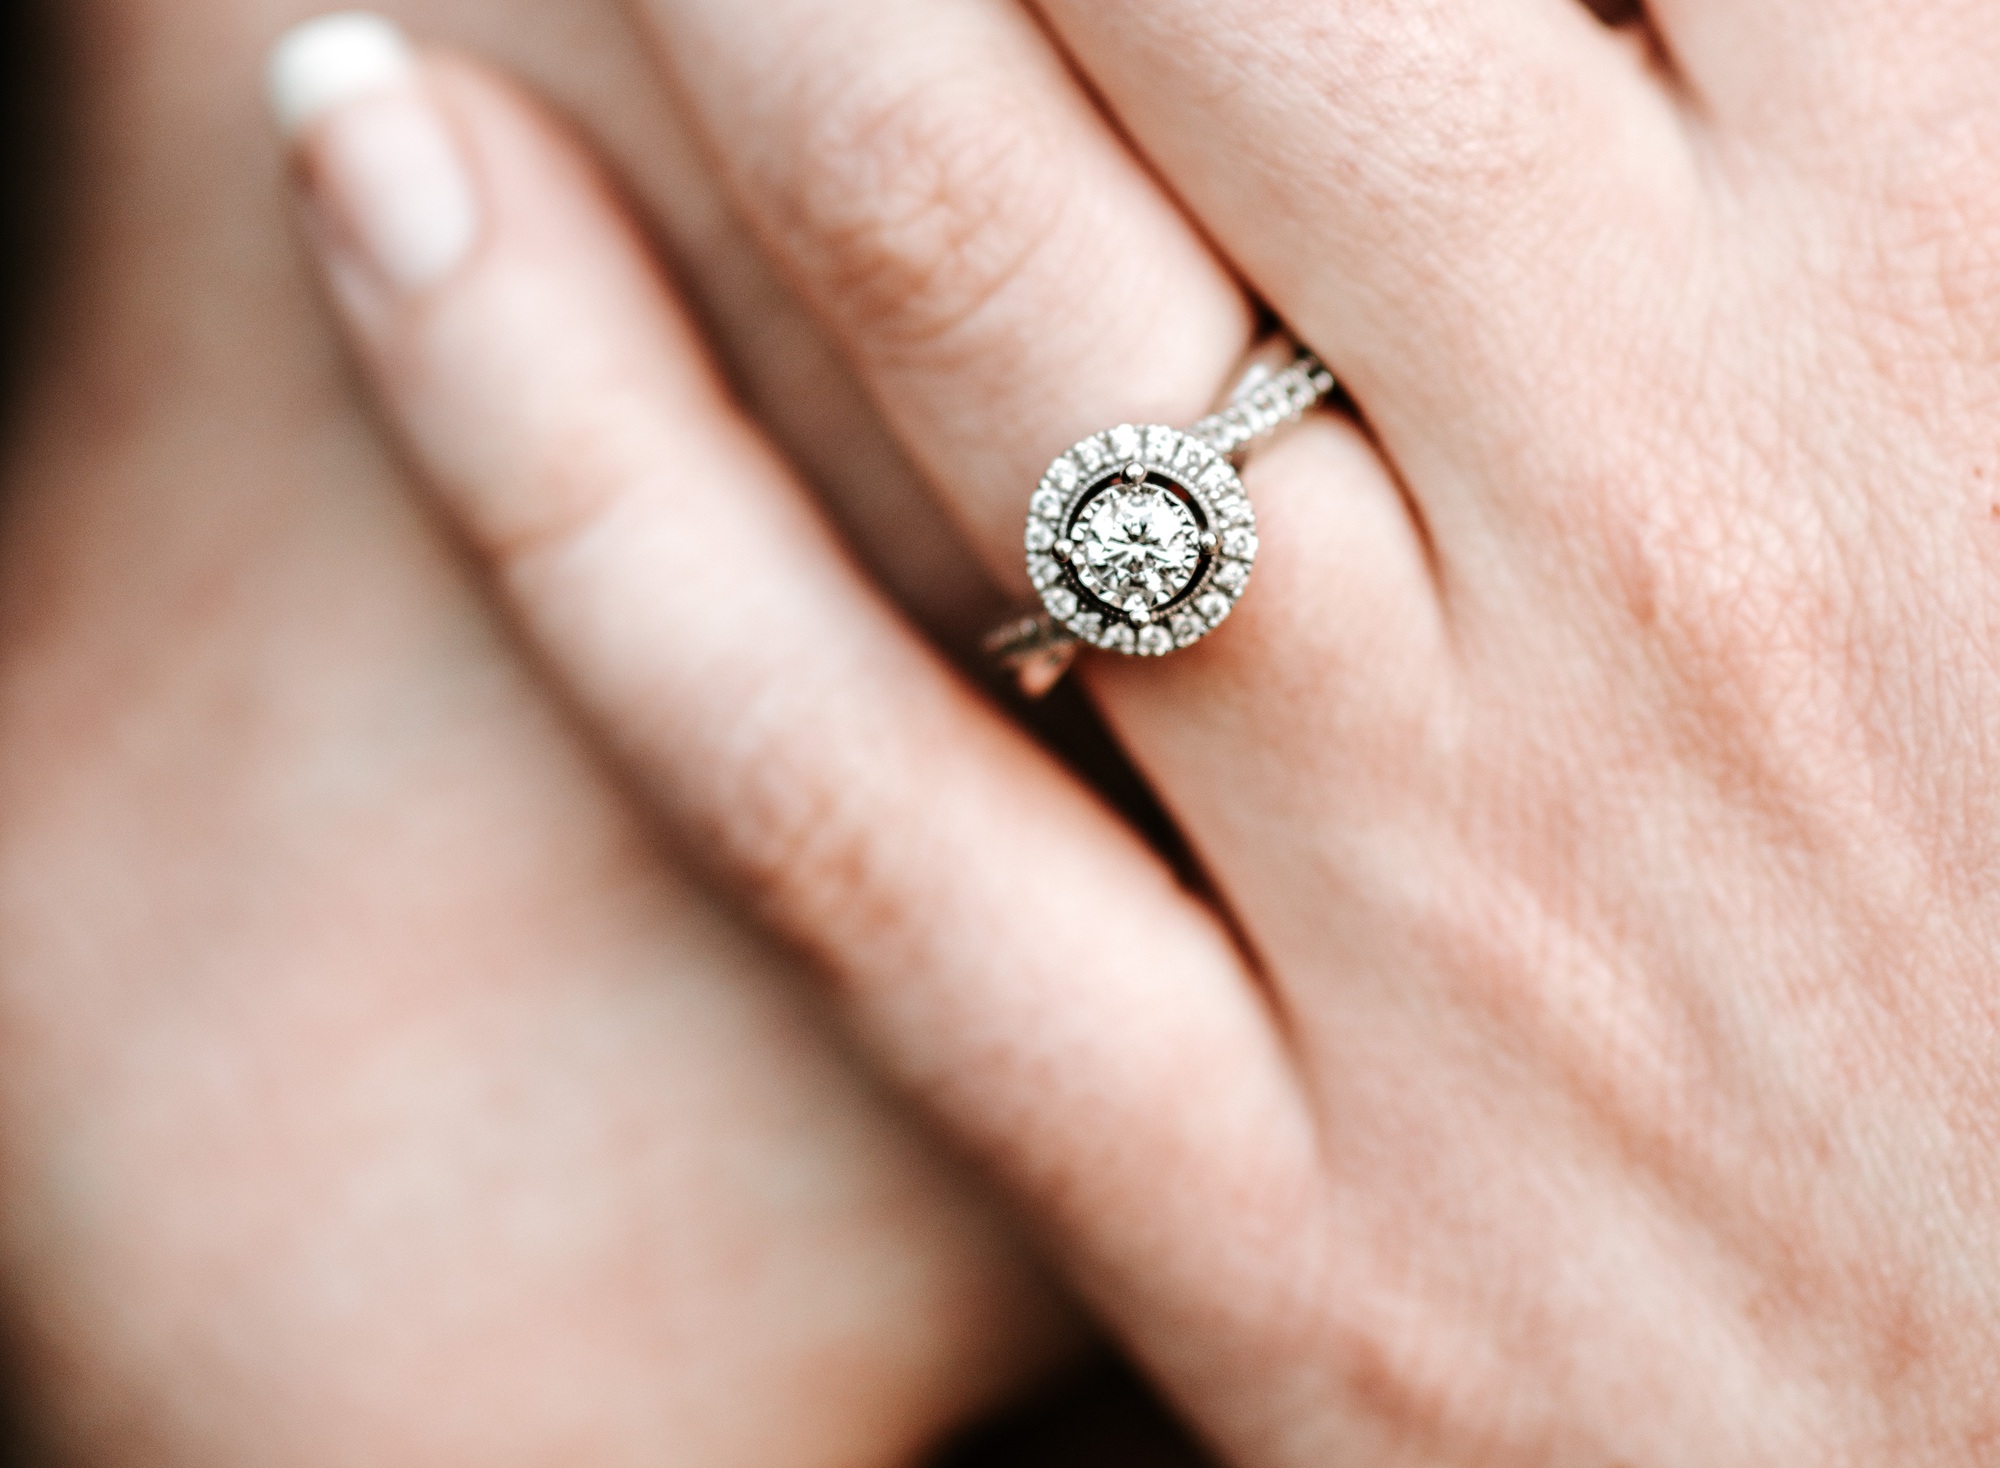 How Much Does a 1 Carat Diamond Cost? | Jewelry Guide